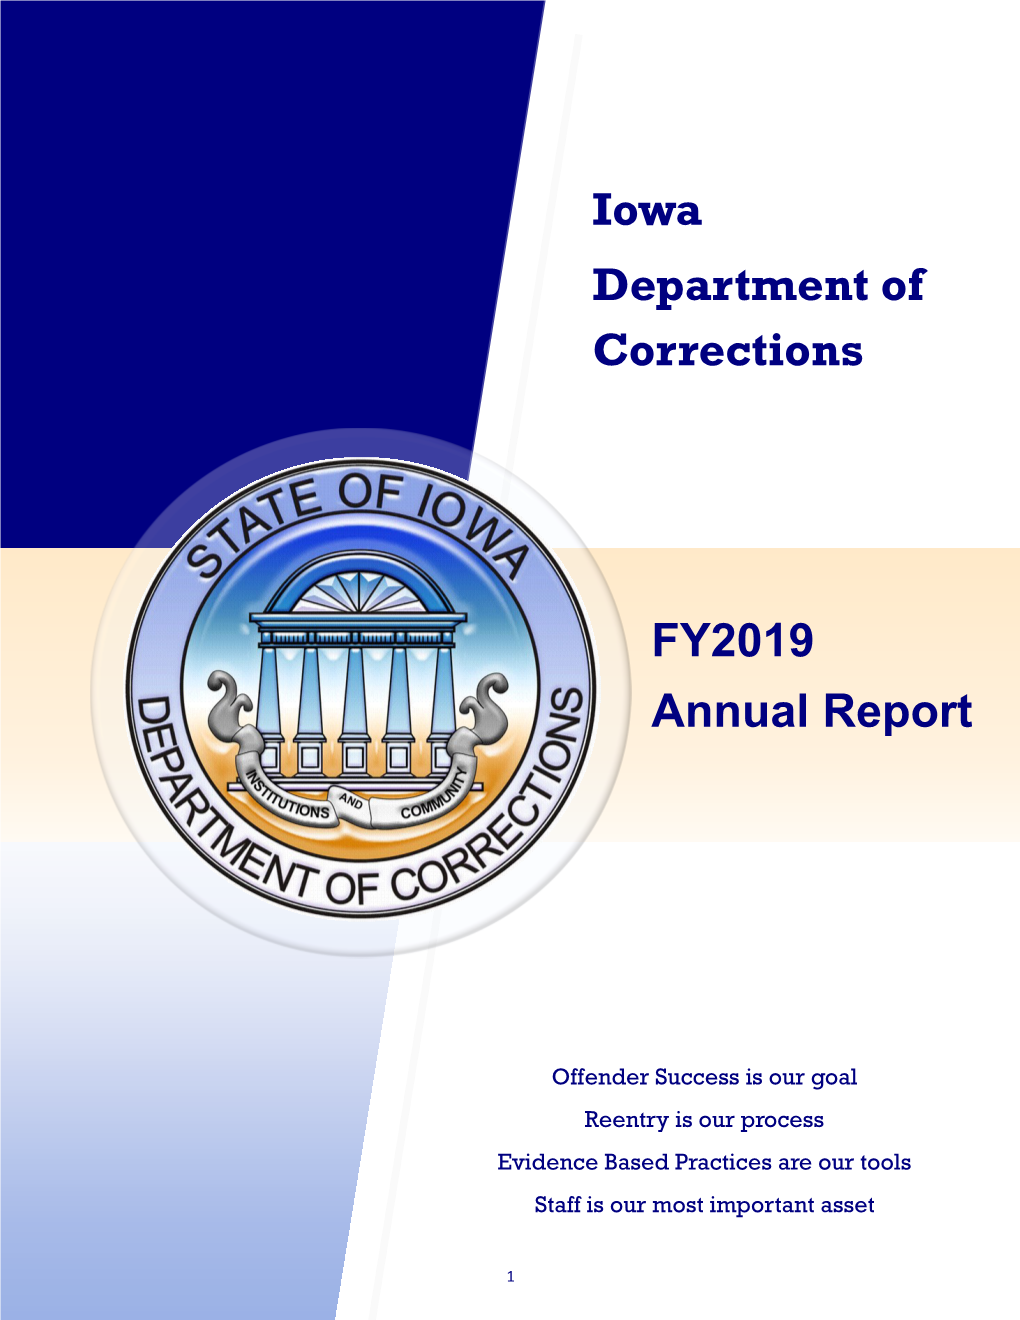 Iowa Department of Corrections FY2019 Annual Report